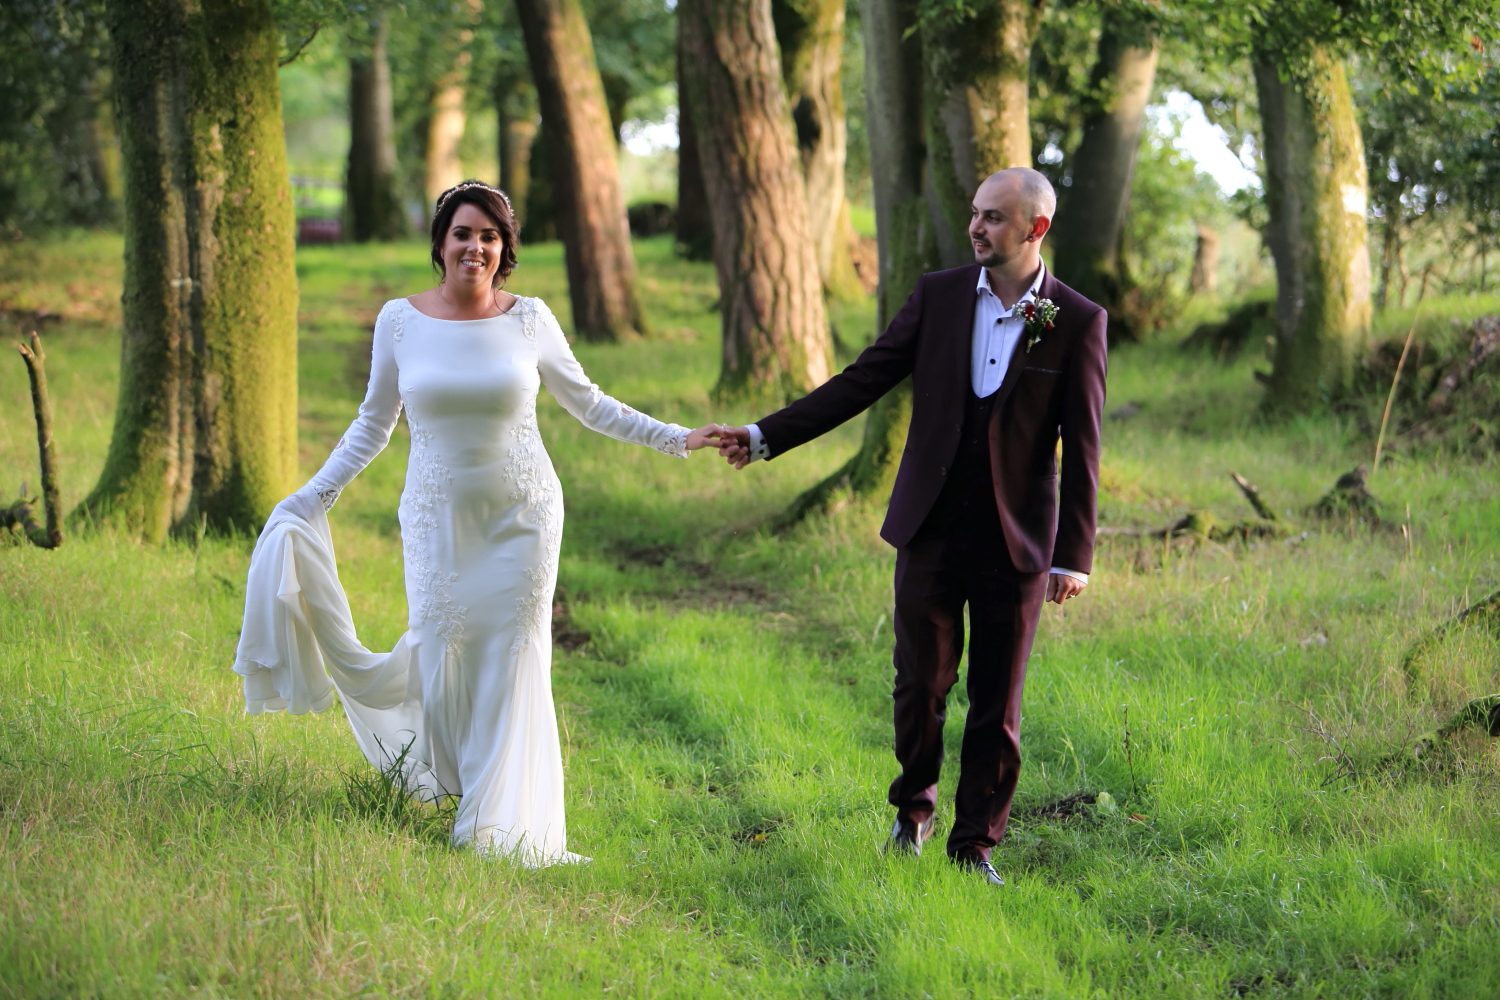 Weddings at The Old Rectory Country House Ireland